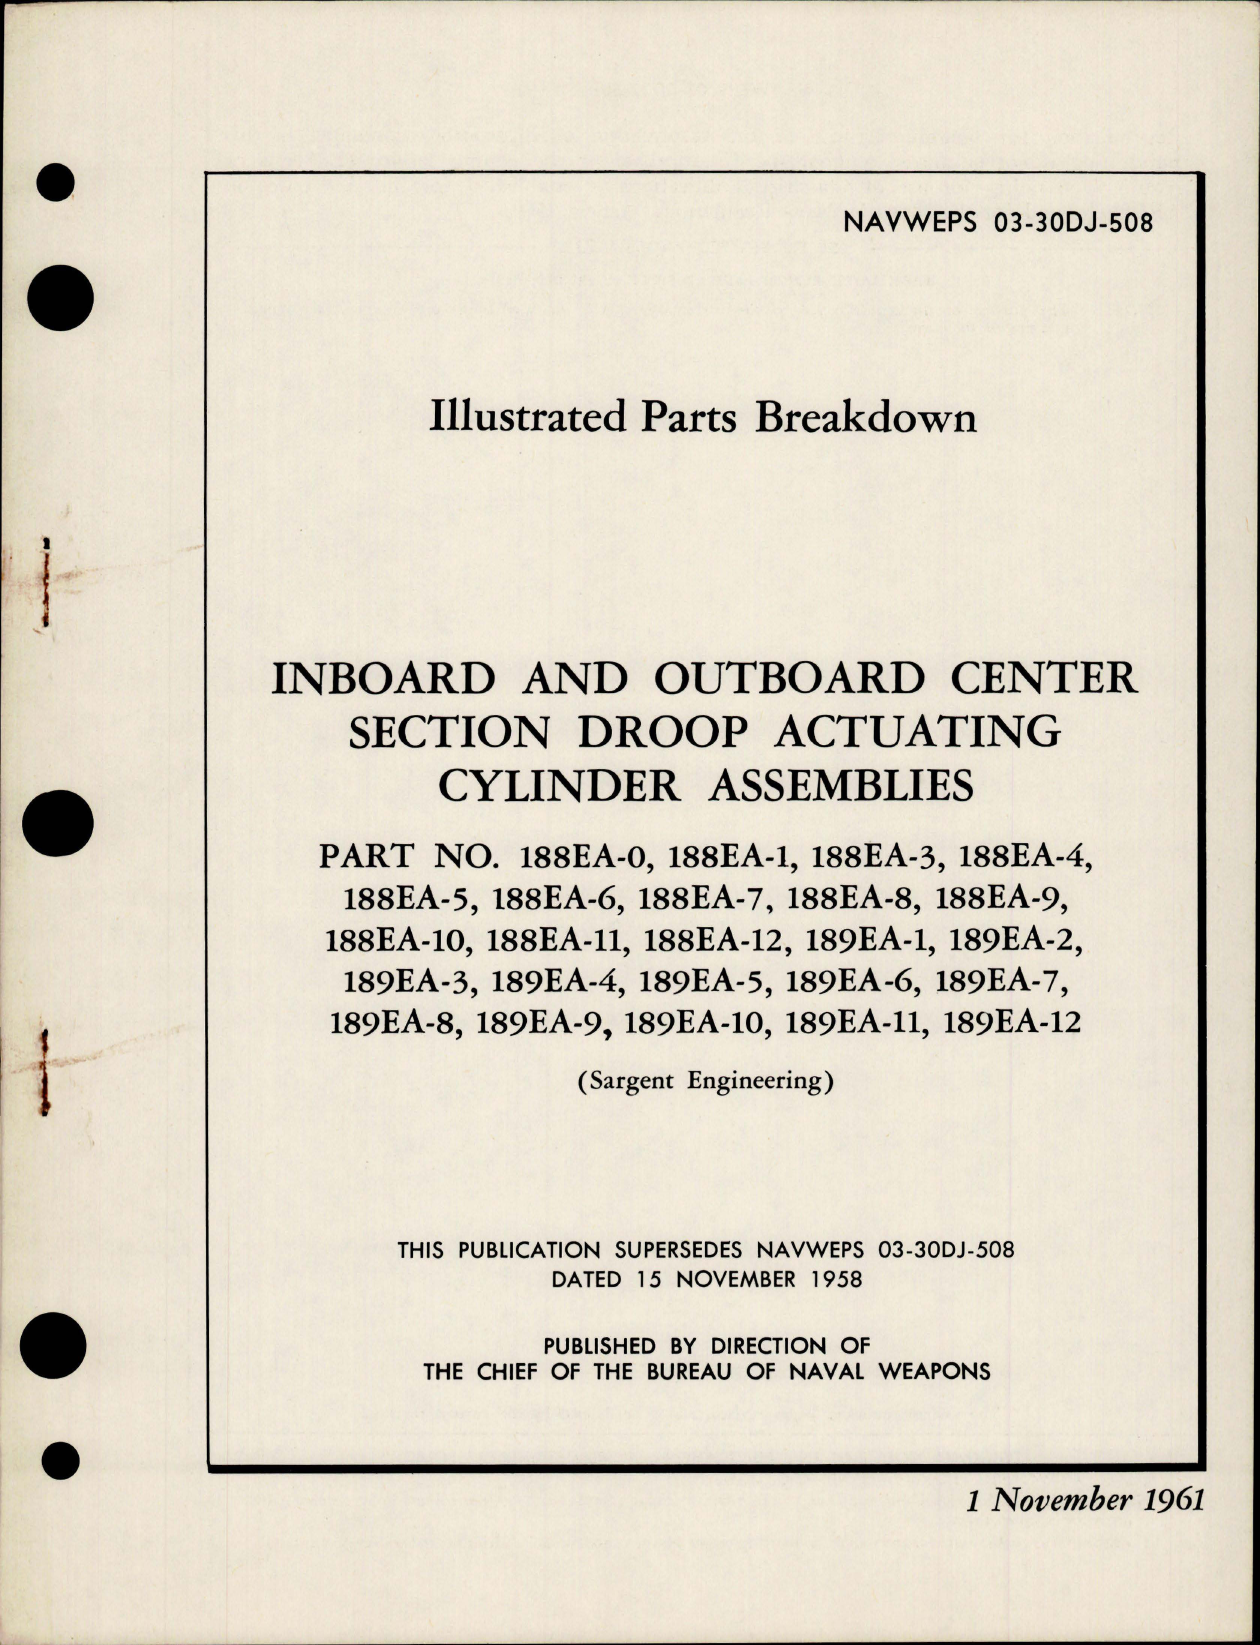 Sample page 1 from AirCorps Library document: Illustrated Parts Breakdown for Inboard and Outboard Center Section Droop Actuating Cylinder Assemblies - Parts 188EA and 189EA Series